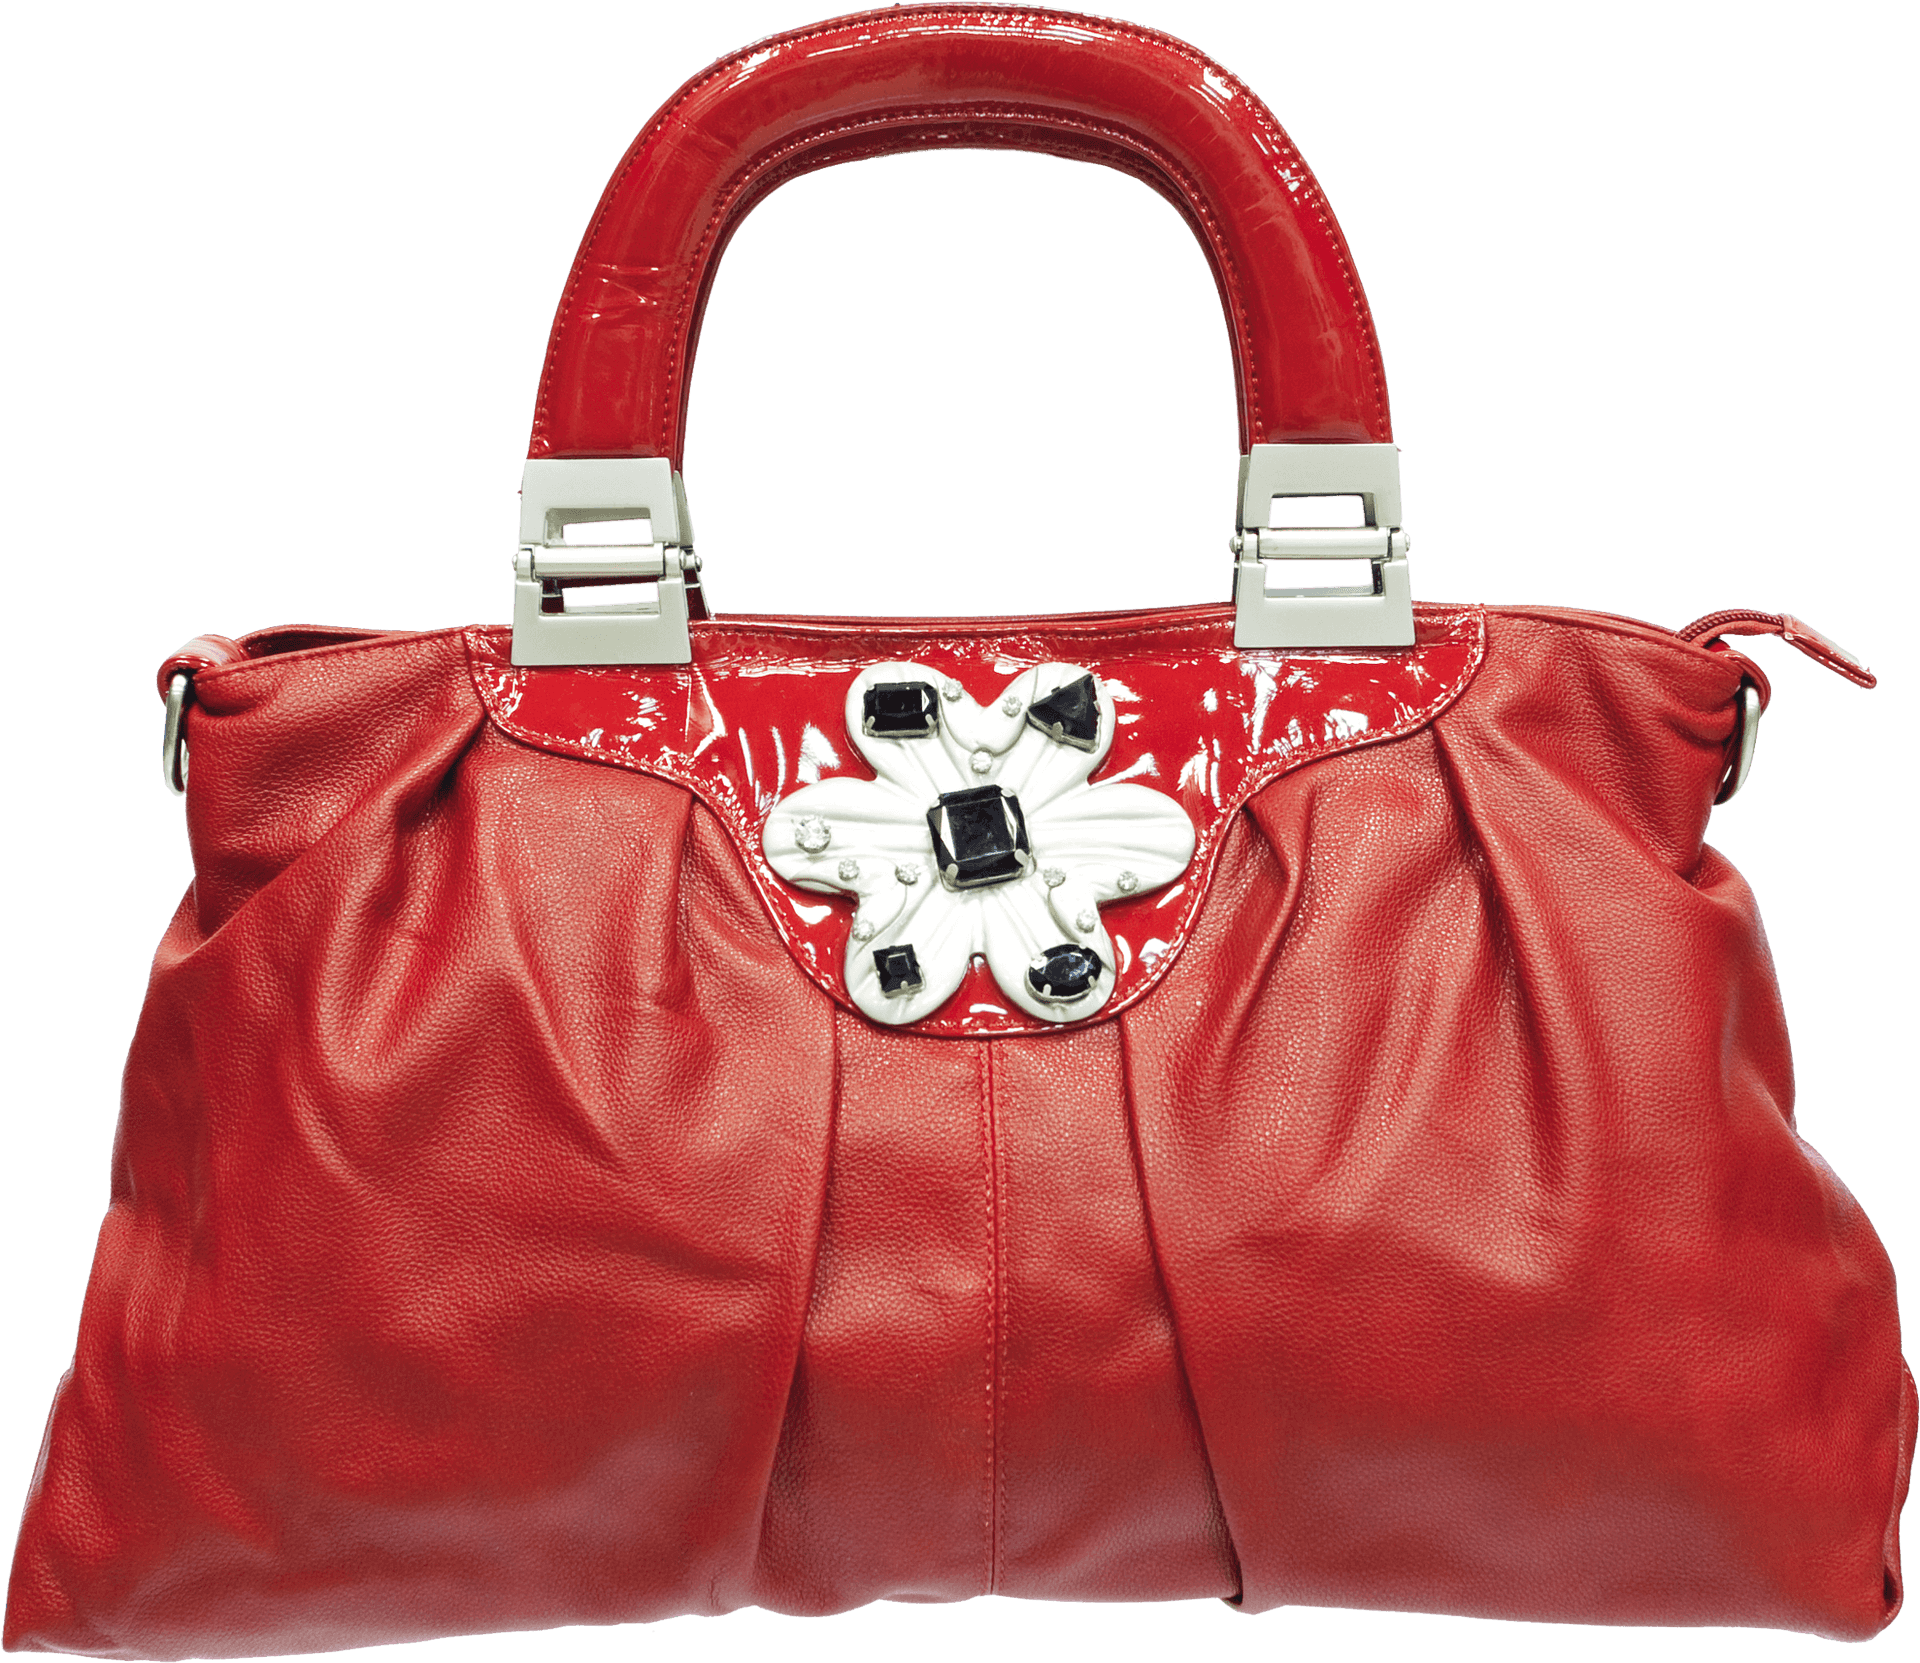 Red Leather Floral Accent Purse.png PNG image